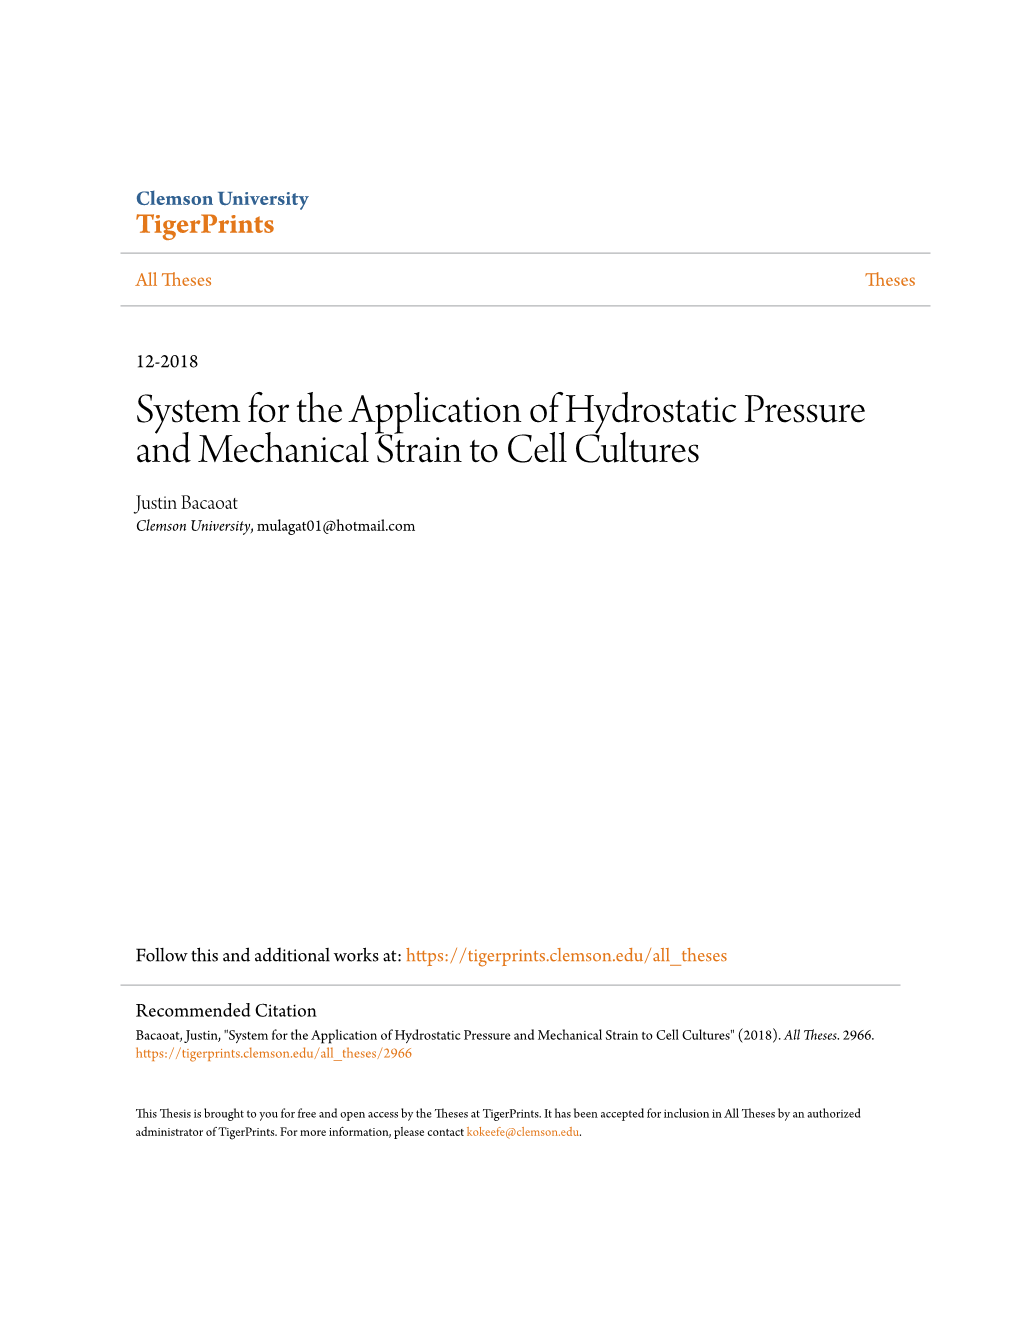 System for the Application of Hydrostatic Pressure and Mechanical Strain to Cell Cultures Justin Bacaoat Clemson University, Mulagat01@Hotmail.Com